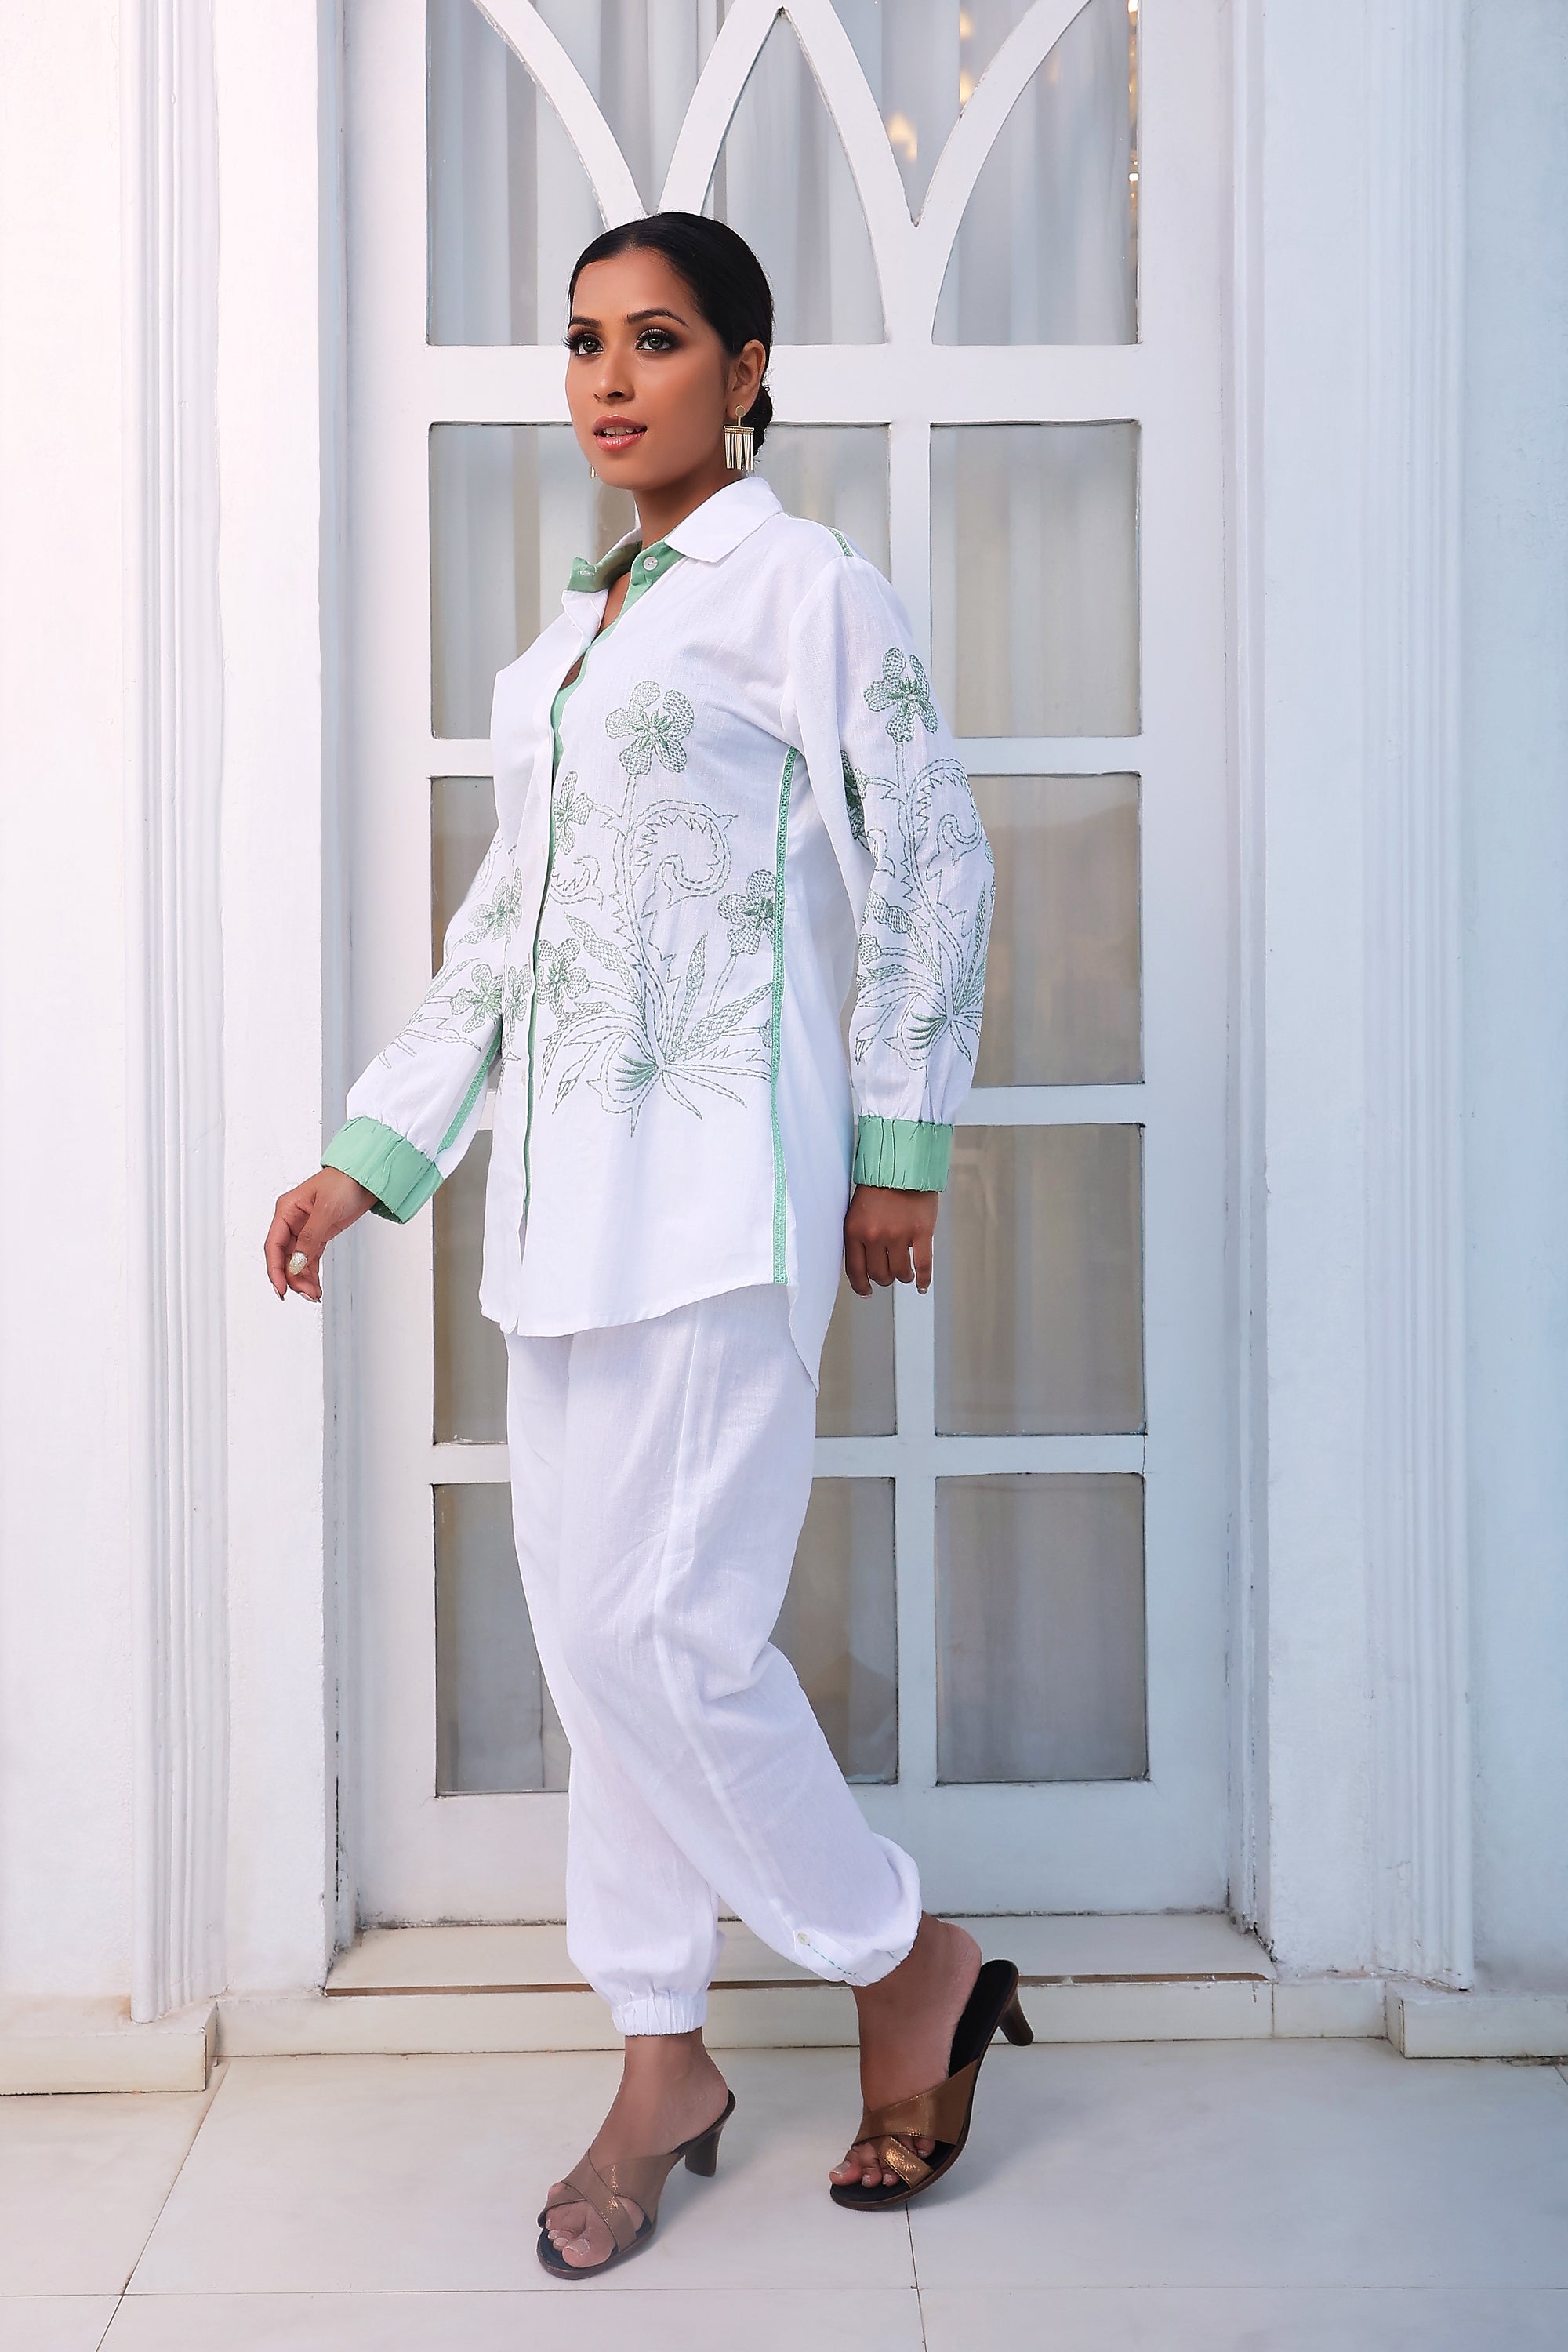 White Shirt Style Tunic With Embroidery - Kaftanize